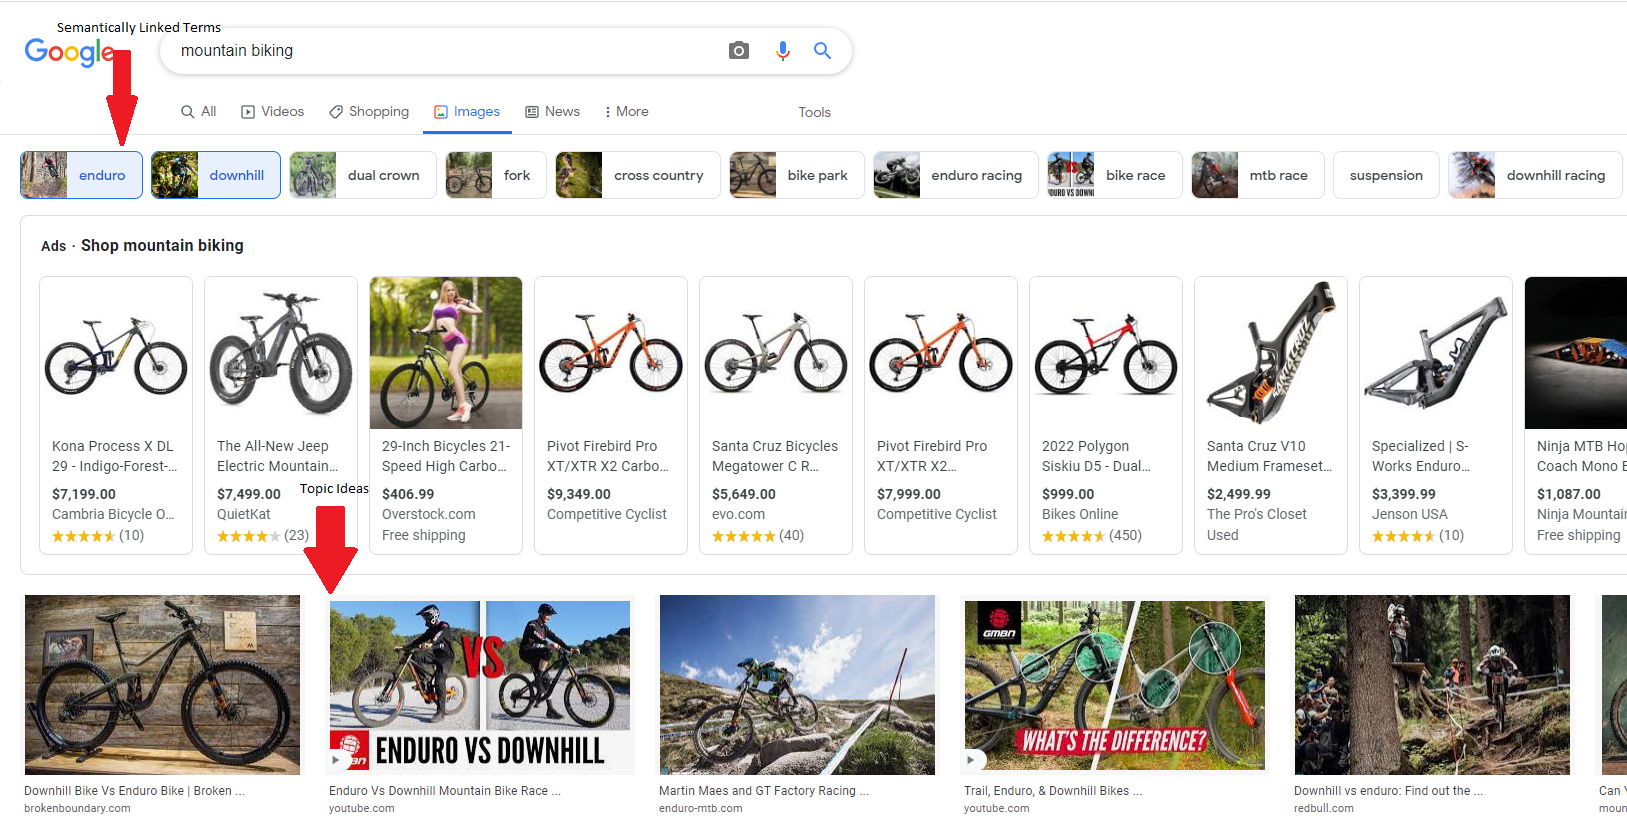 Topic research using Google image results for mountain biking